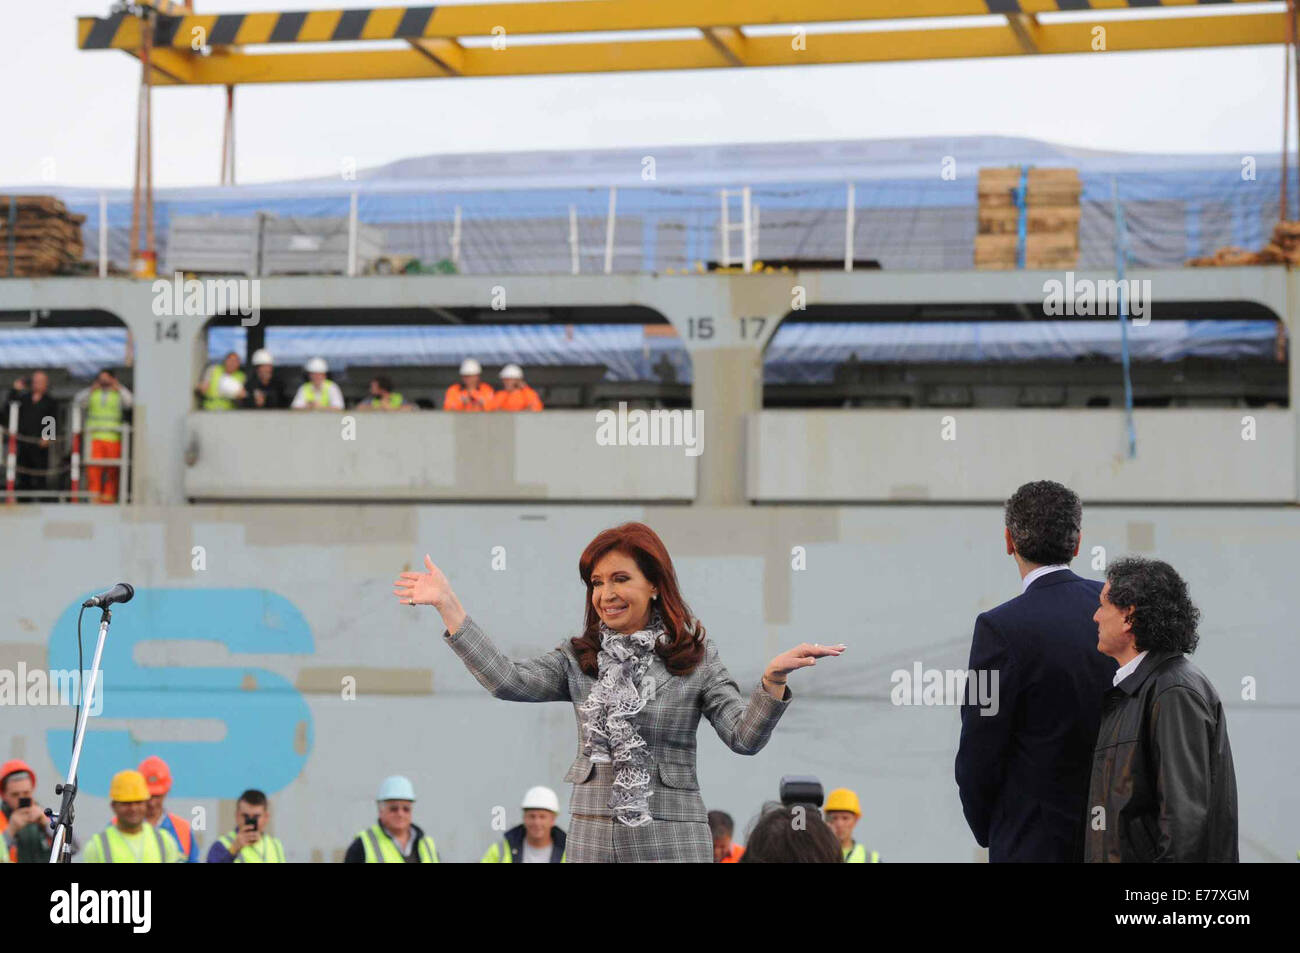 (140909) -- BUENOS AIRES, Sept. 9, 2014 (Xinhua) -- Argentina's President Cristina Fernandez participates in an activity promoting measures to renovate the country's railroad system, at Buenos Aires port Sept. 8, 2014. (Xinhua/Maximiliano Luna/TELAM) (bxq) Stock Photo